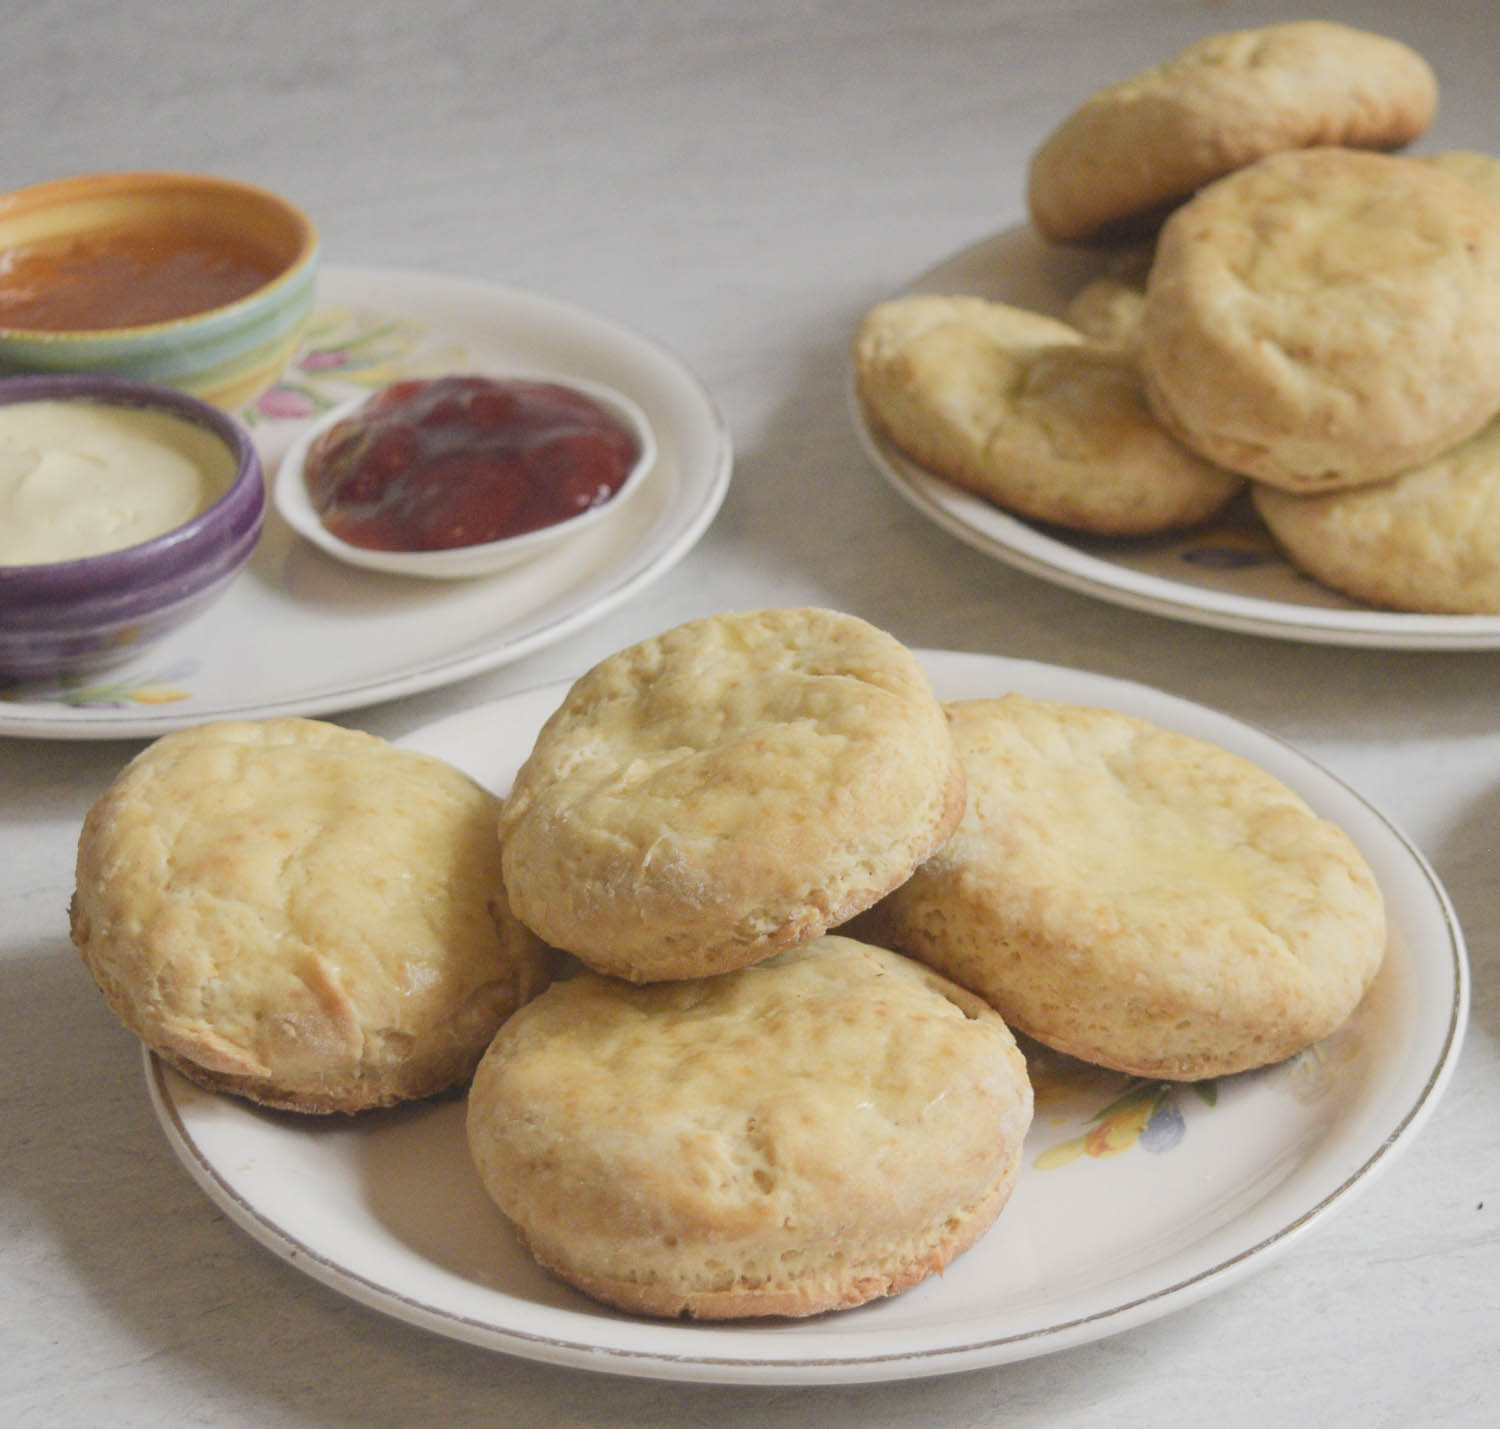 biscuits with jam and butter